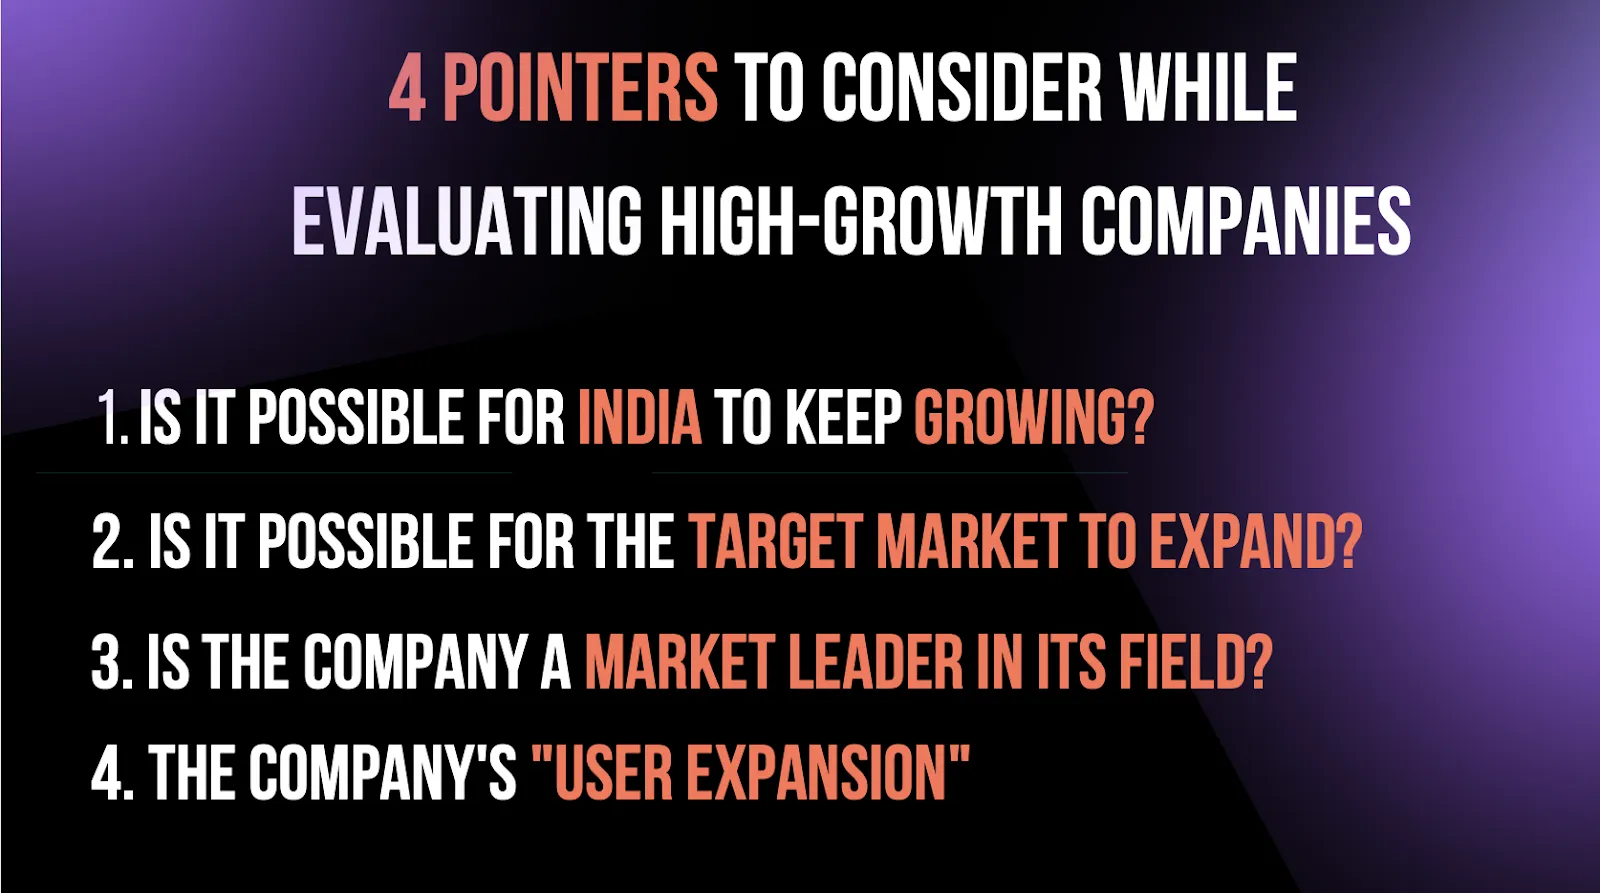 Pointers to Consider While Evaluating High Growth Companies